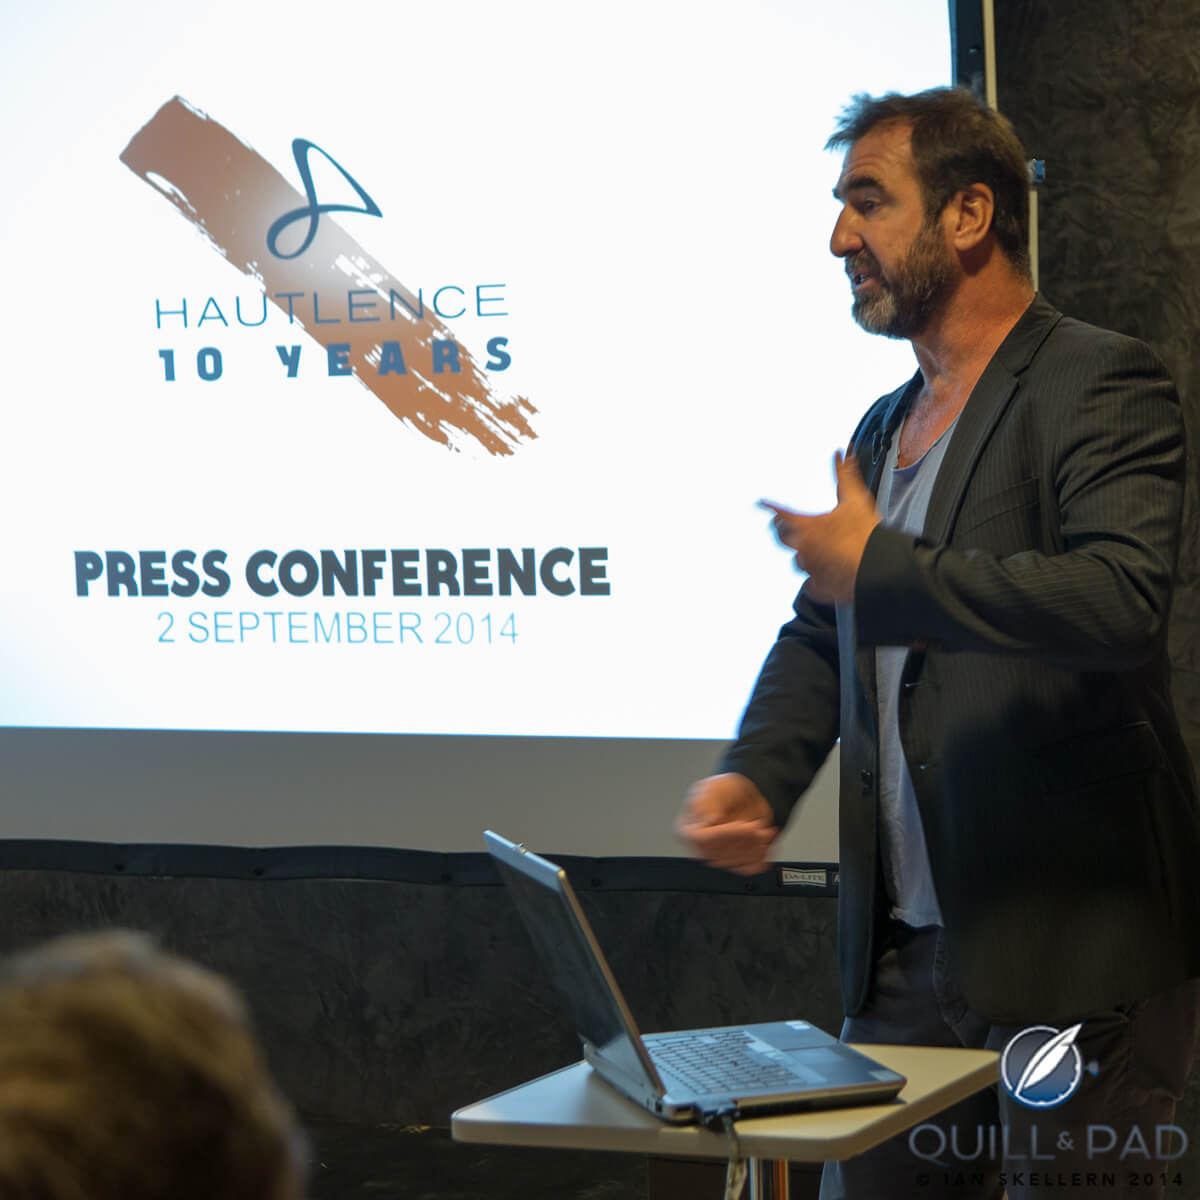 Hautlence ambassador Eric Cantona explaining his role at Hautlence at the brand's 10th anniversary press conference